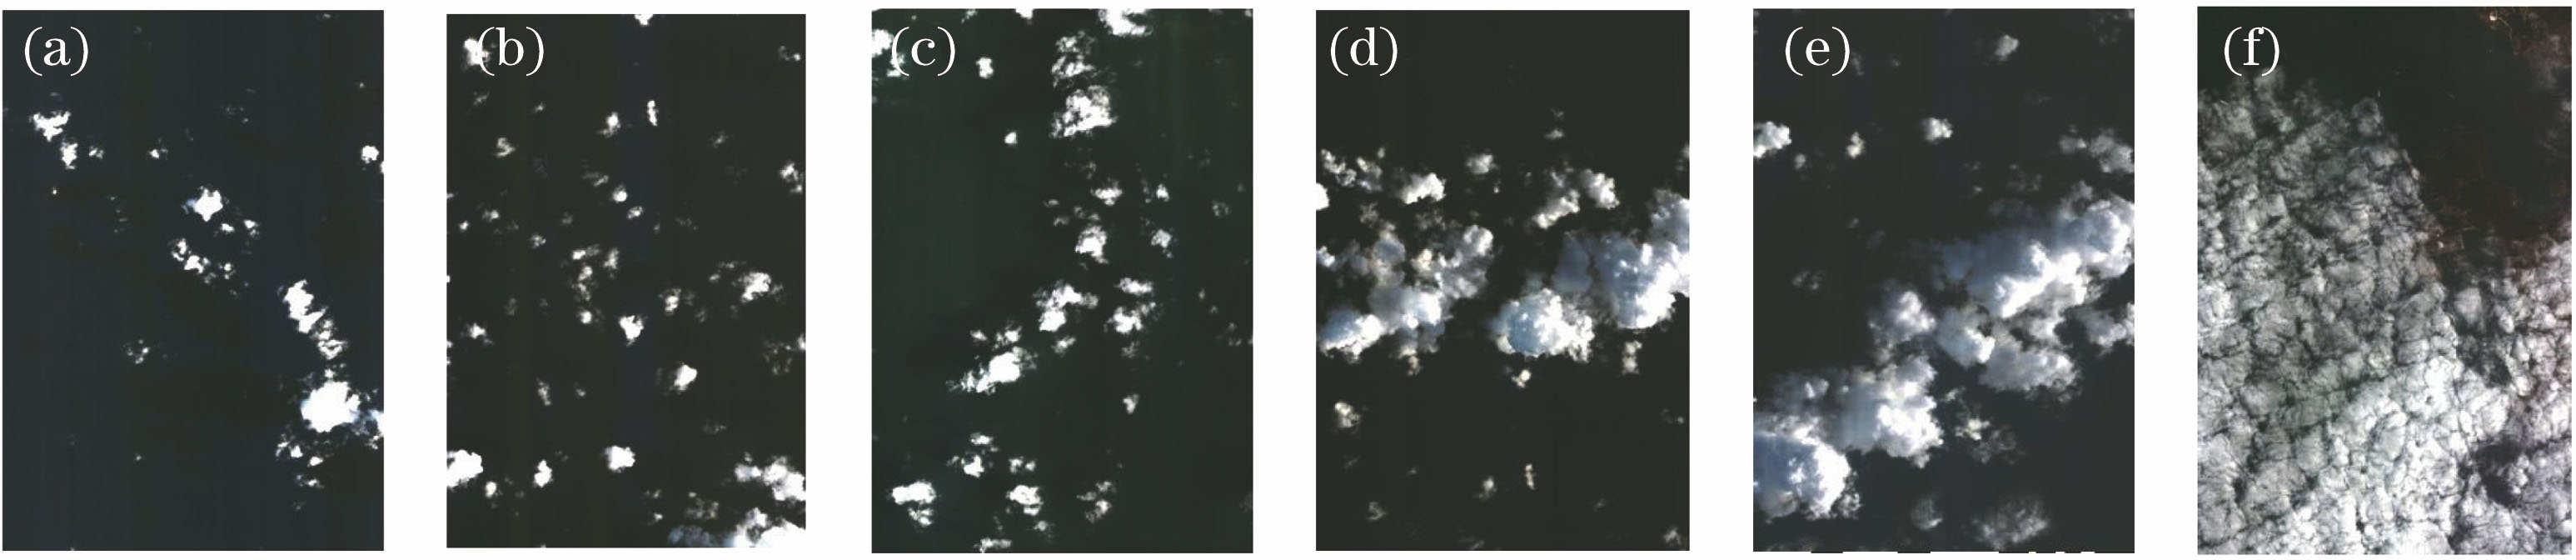 Scene images with features of cloud-only. (a) Sample A; (b) sample B; (c) sample C; (d) sample D; (e) sample E; (f) sample F